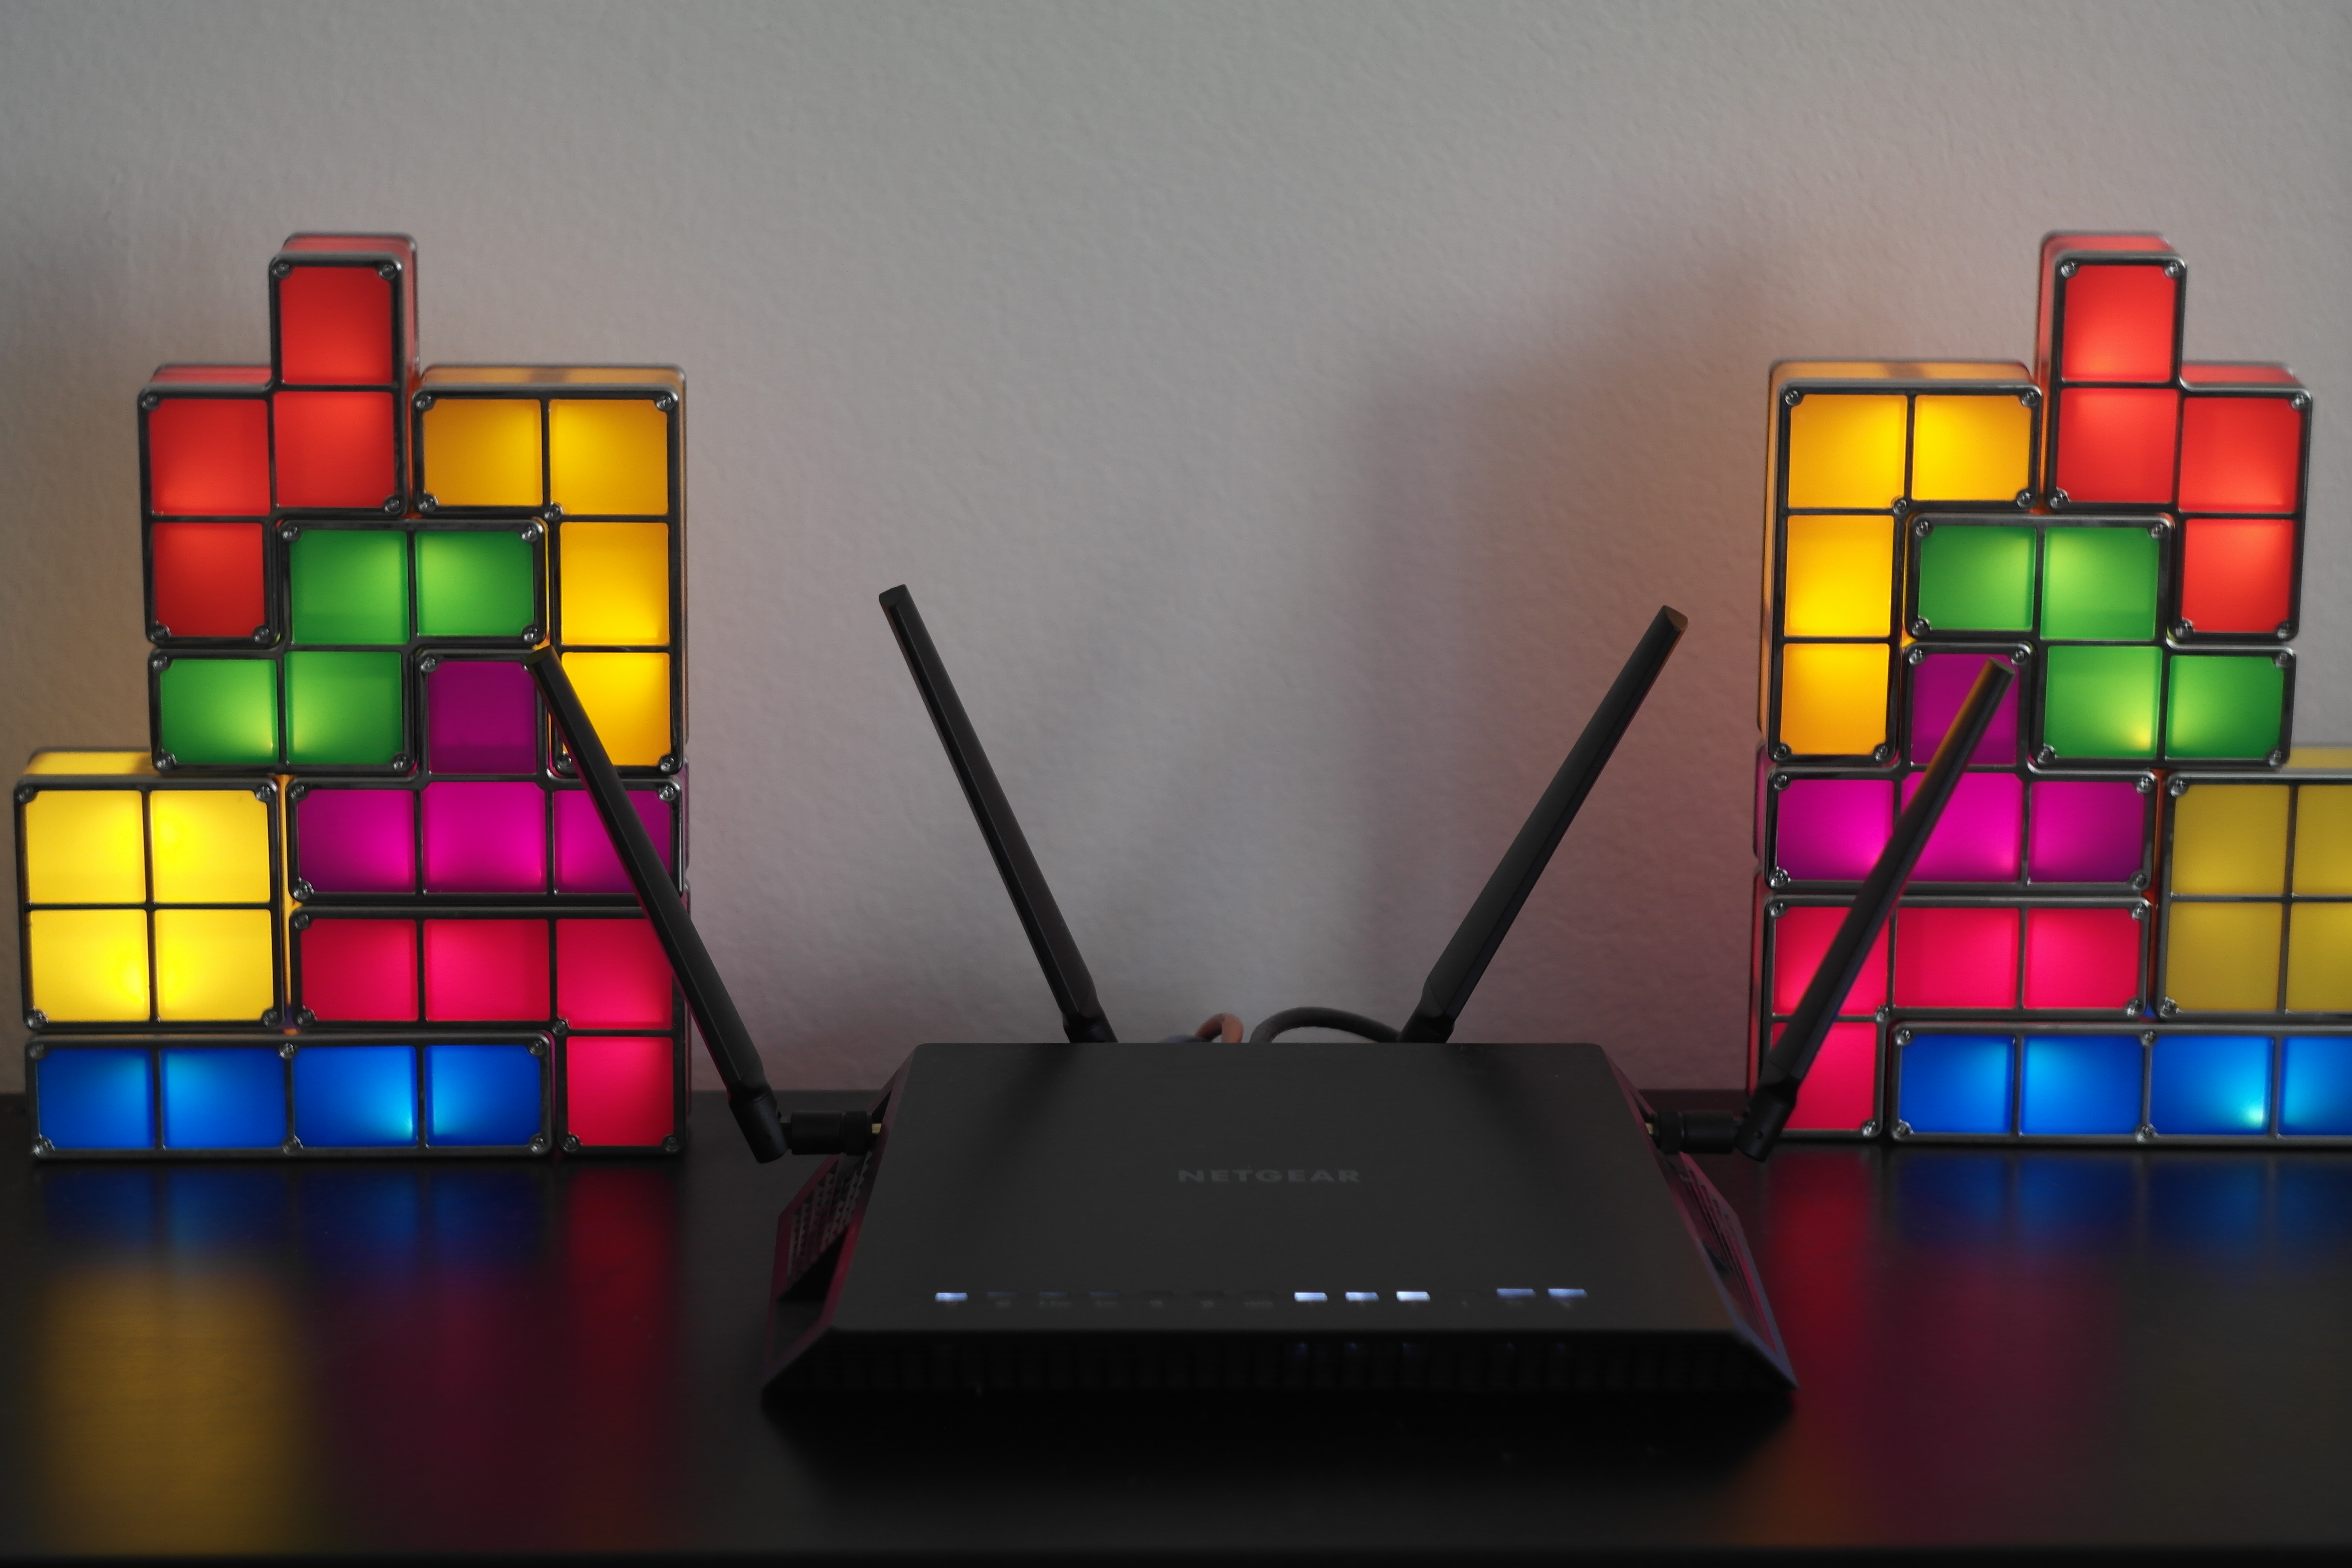 A wireless router with antennas at various angles